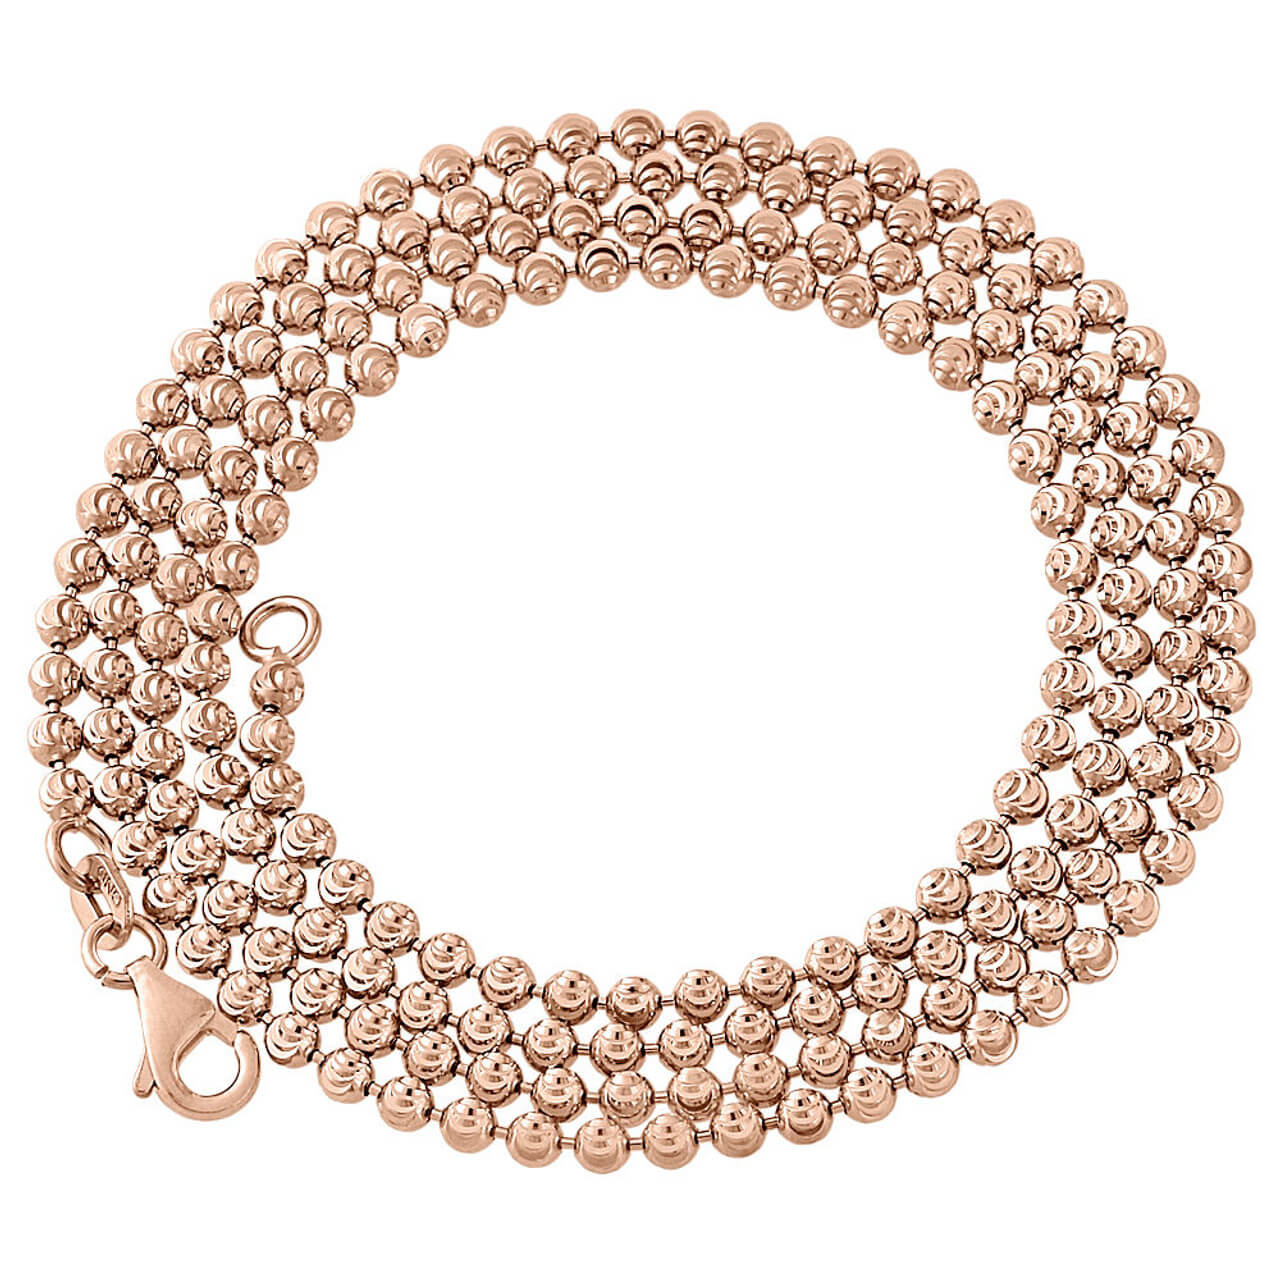 10K Rose Gold 2.5mm Moon Cut Italian Beaded Ball Chain Necklace 22 - 30 Inches